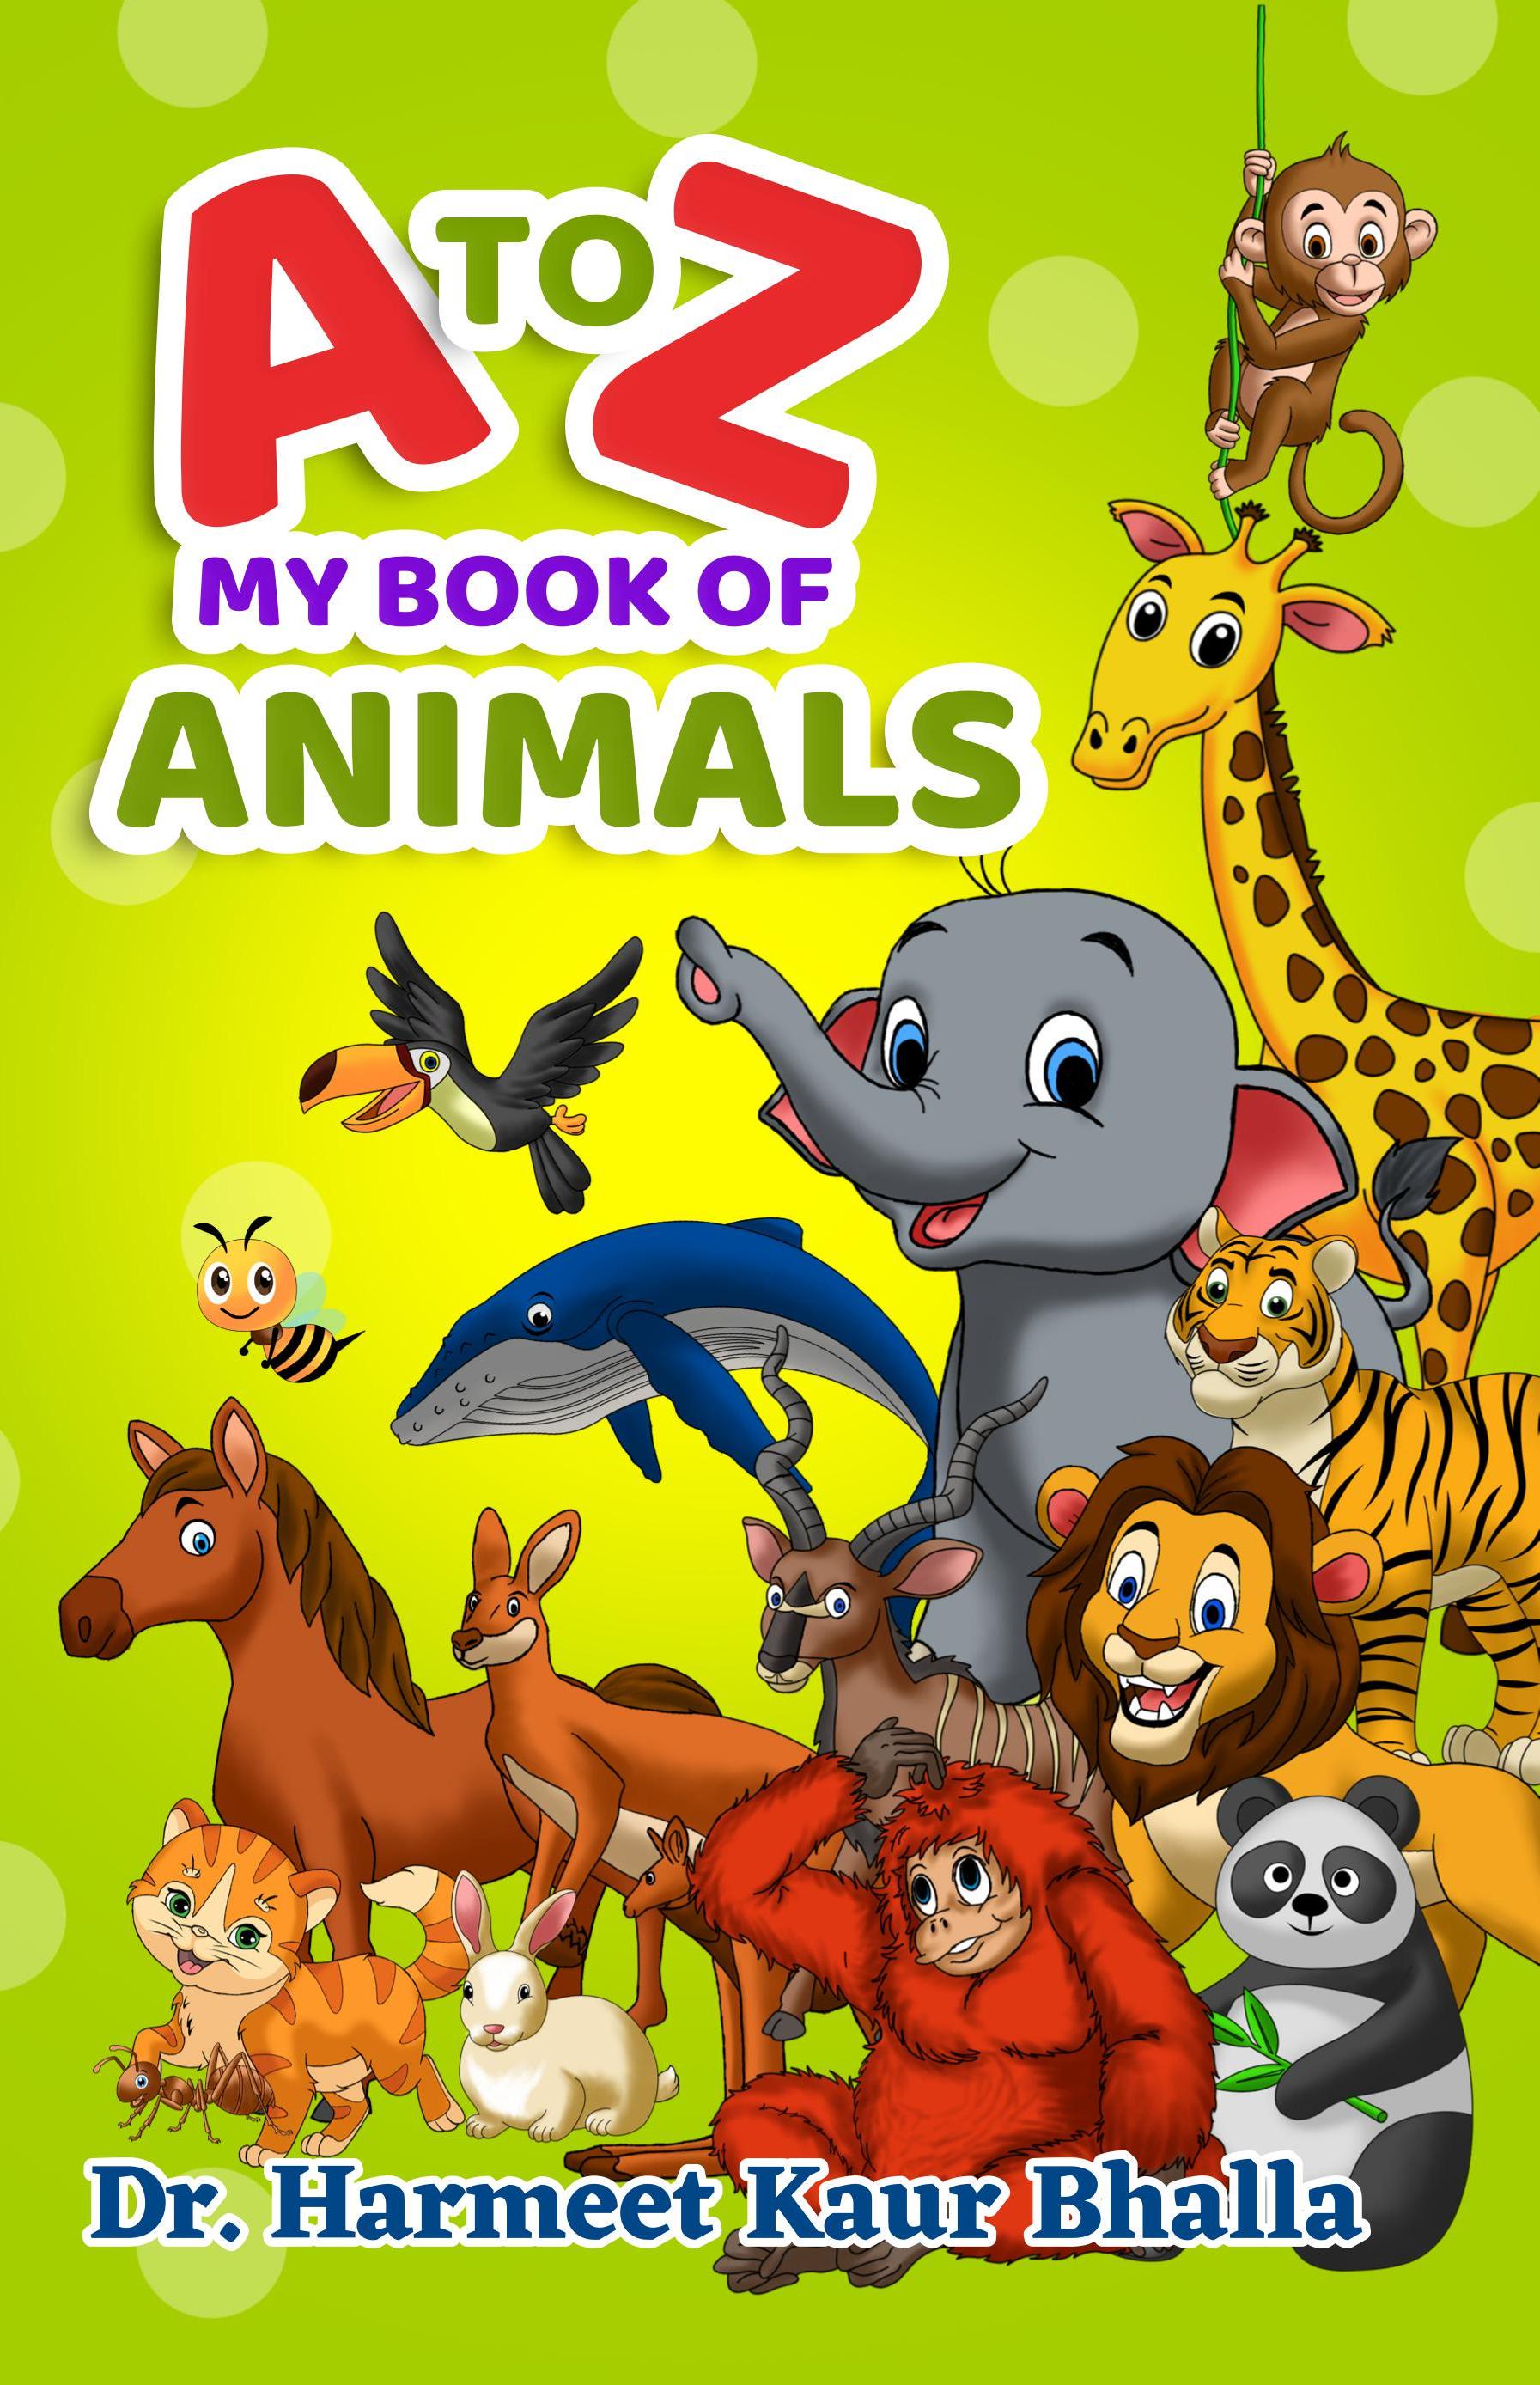 Smashwords – A to Z My Books of Animals – a book by Dr. Harmeet Kaur Bhalla